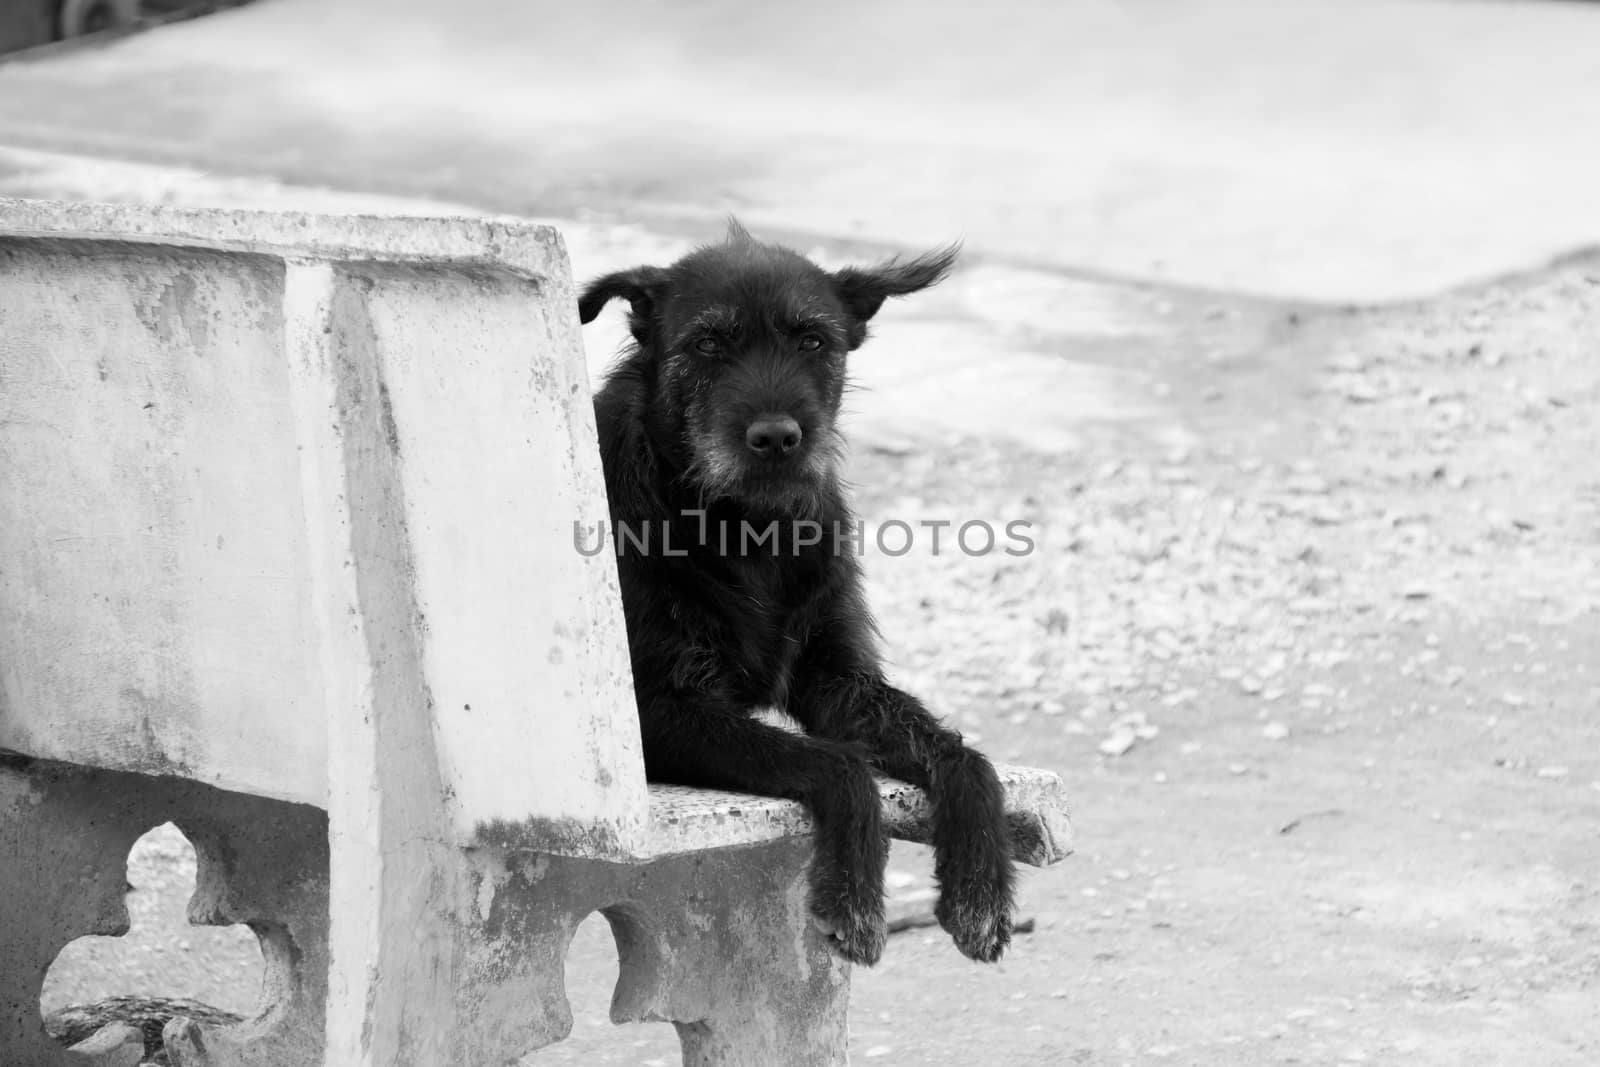 Lonely Black Dog (Look straight) by mranucha